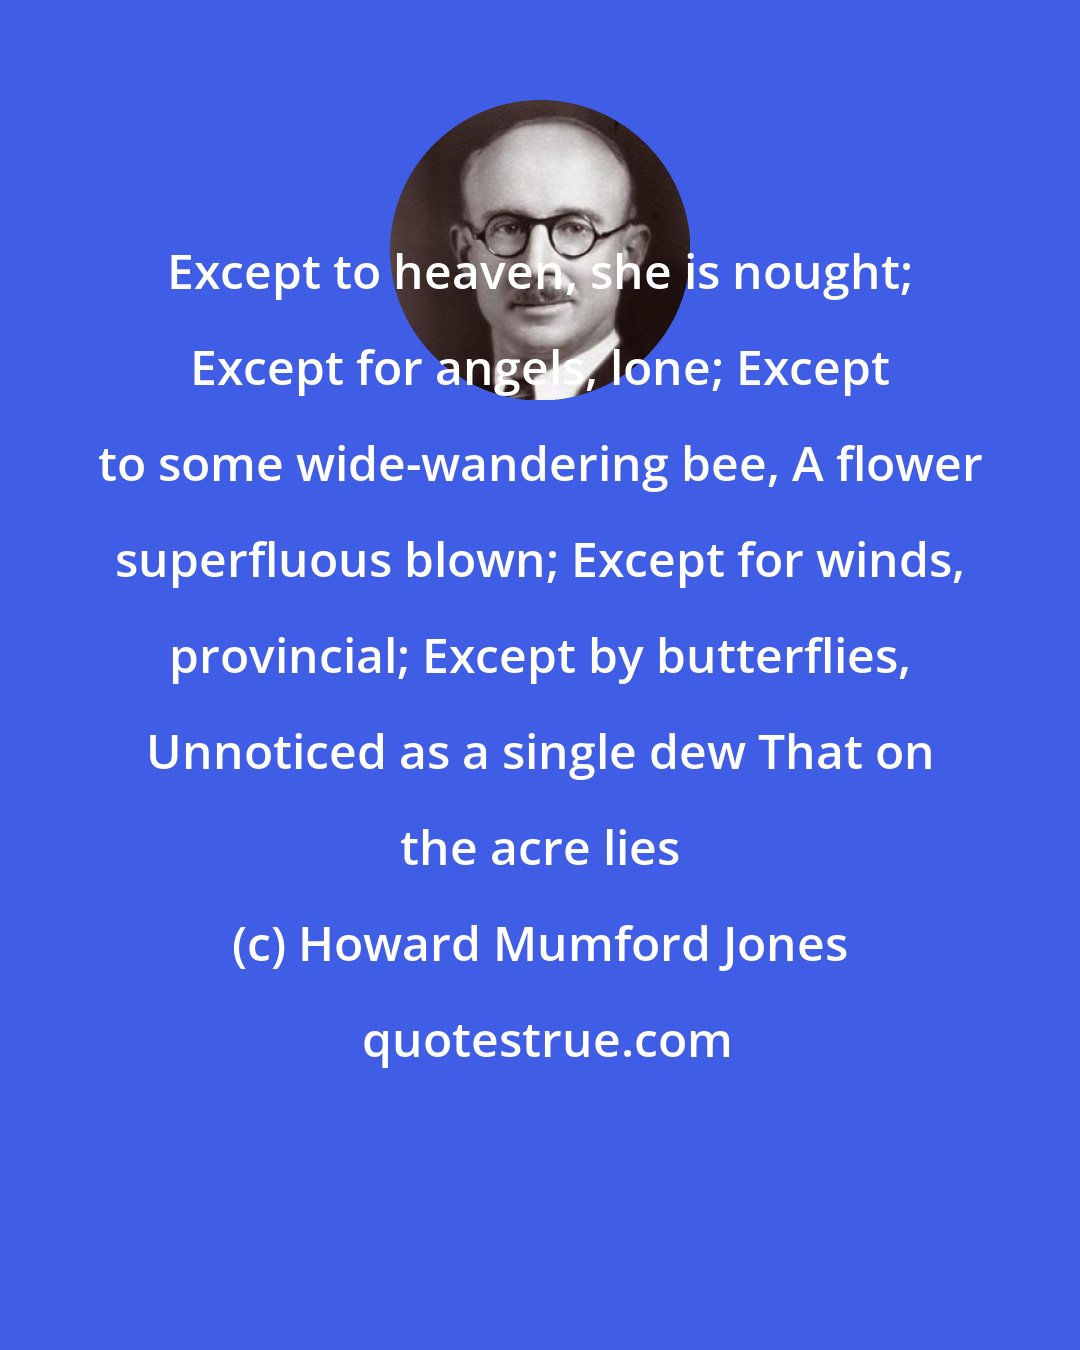 Howard Mumford Jones: Except to heaven, she is nought; Except for angels, lone; Except to some wide-wandering bee, A flower superfluous blown; Except for winds, provincial; Except by butterflies, Unnoticed as a single dew That on the acre lies